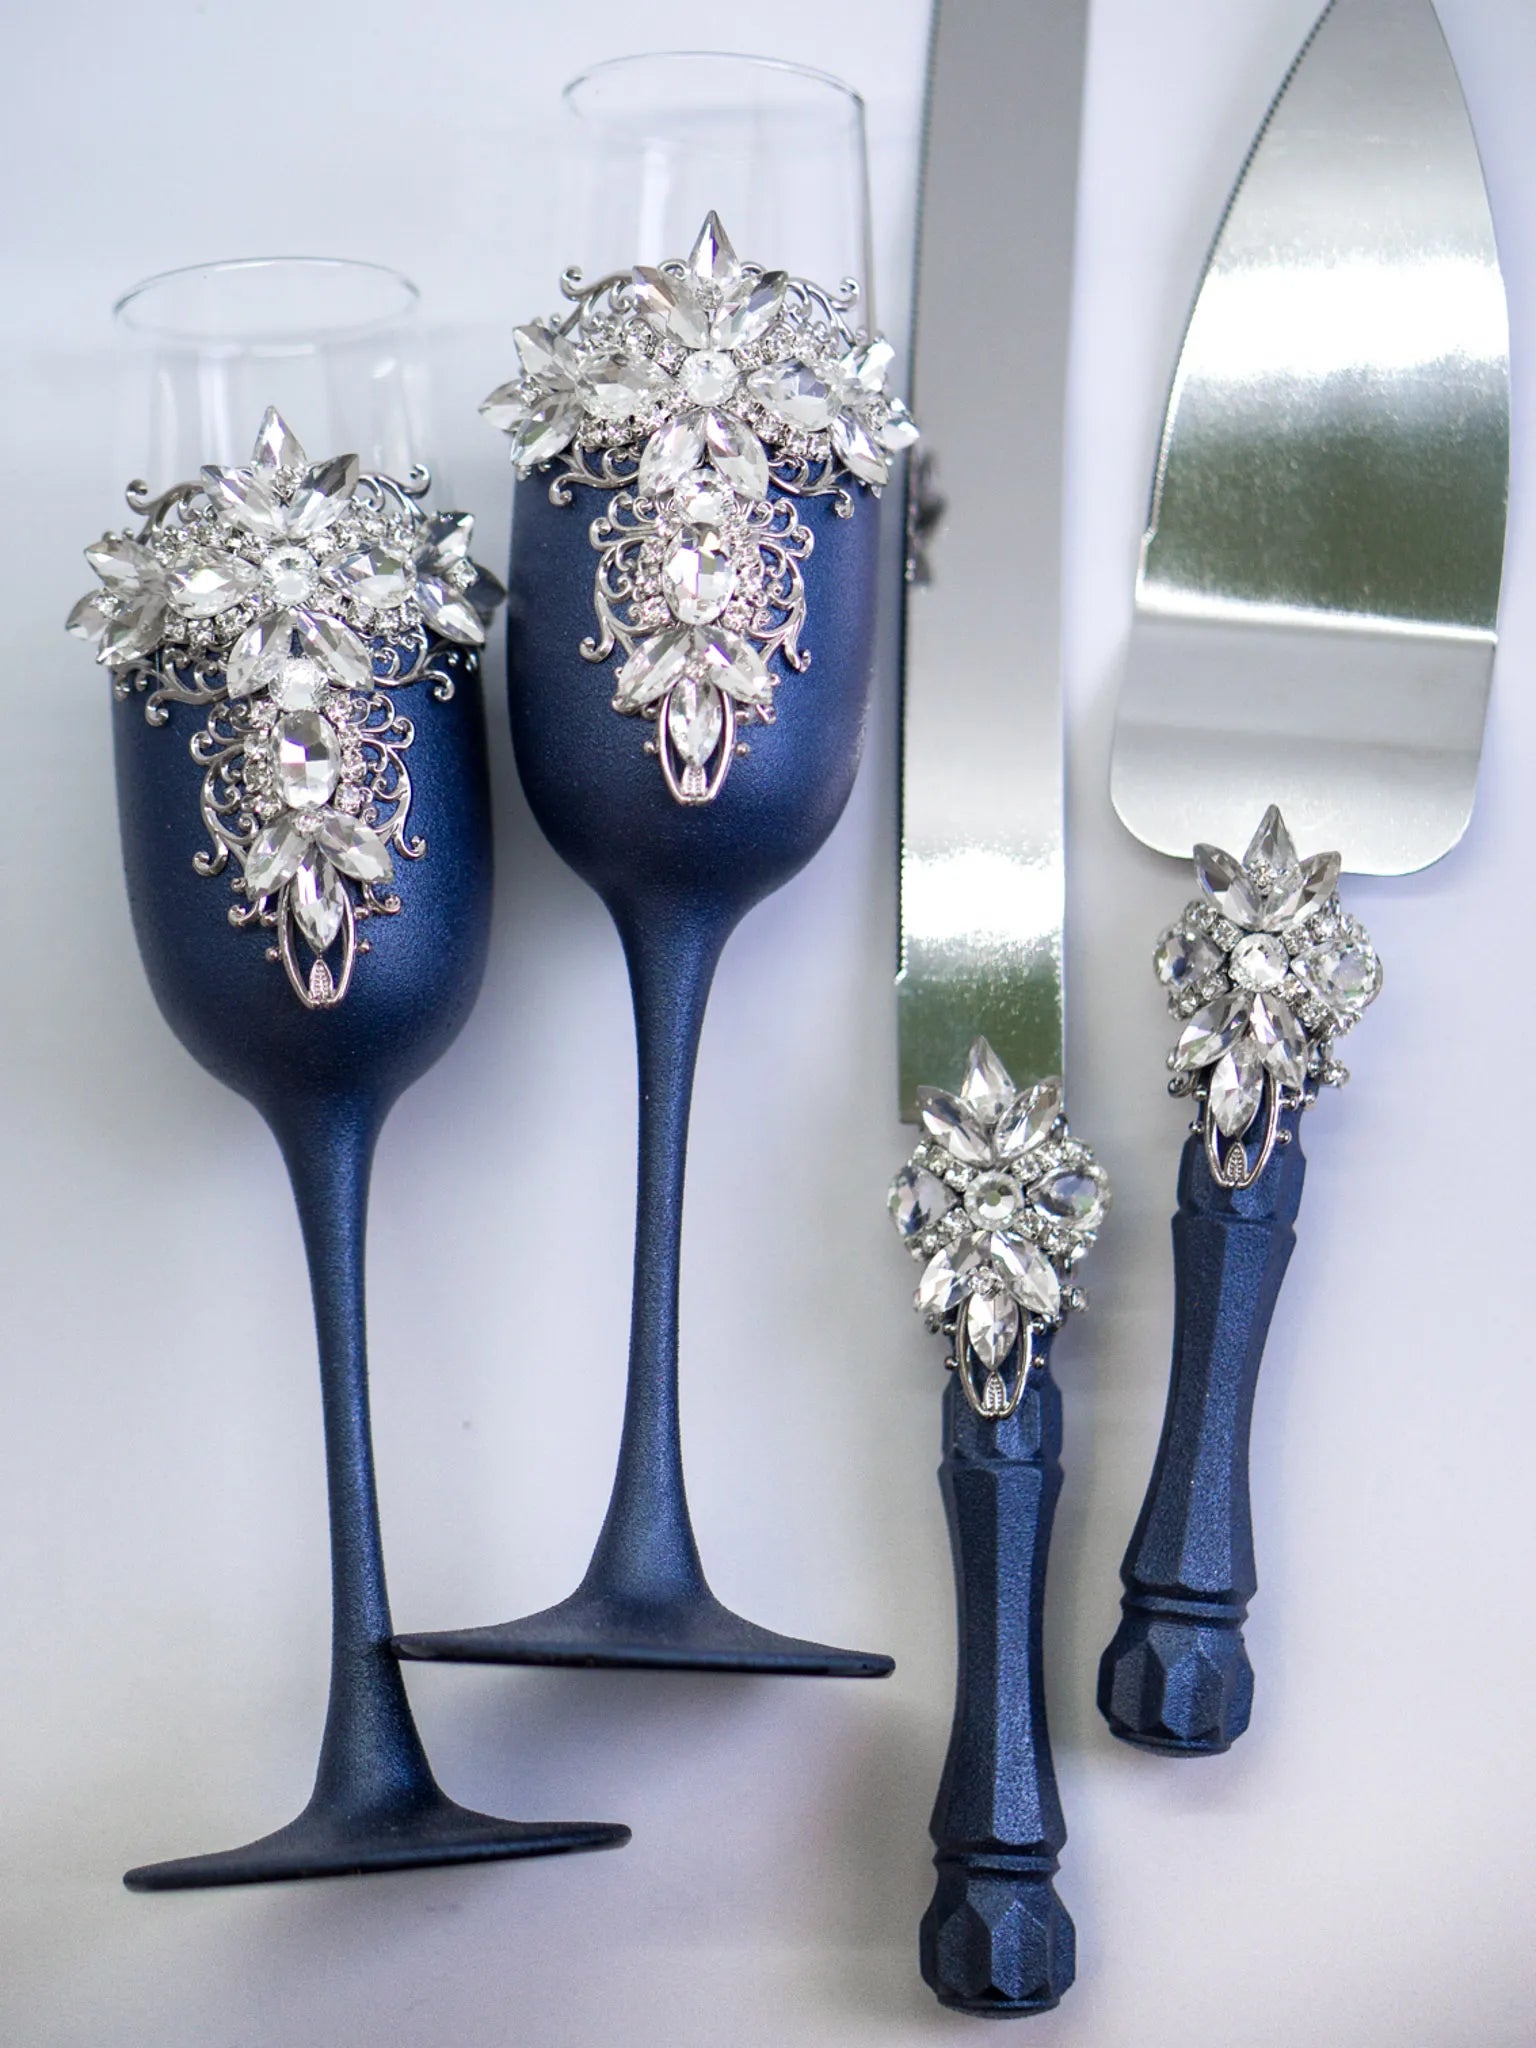 Special occasion champagne glasses in navy blue